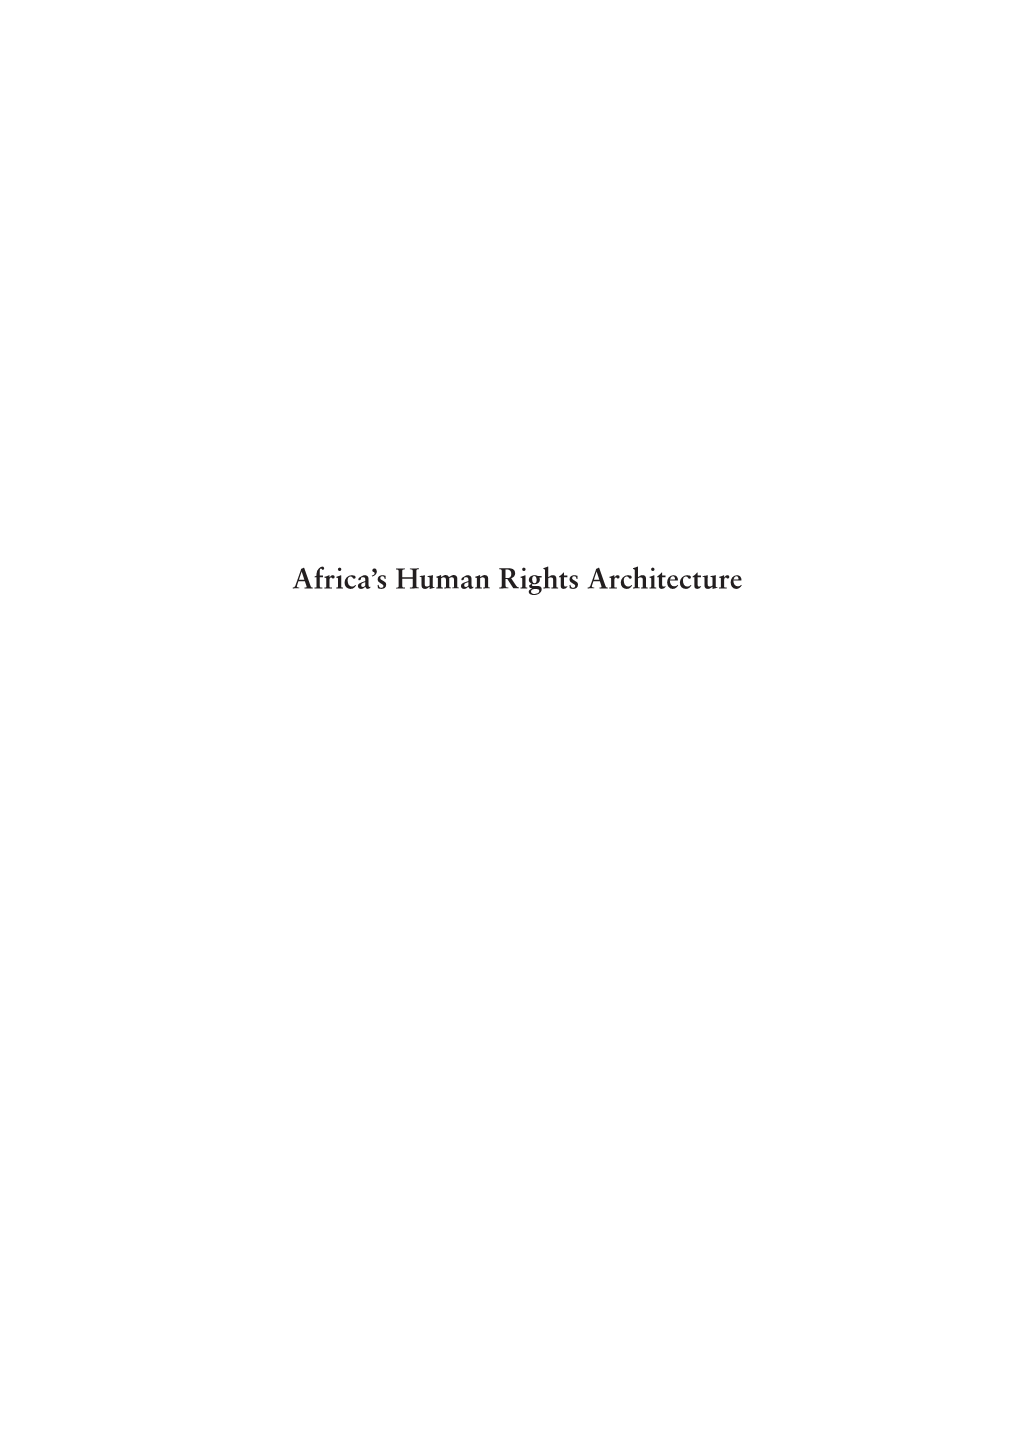 FARCH African Human Rights Architecture.Indd